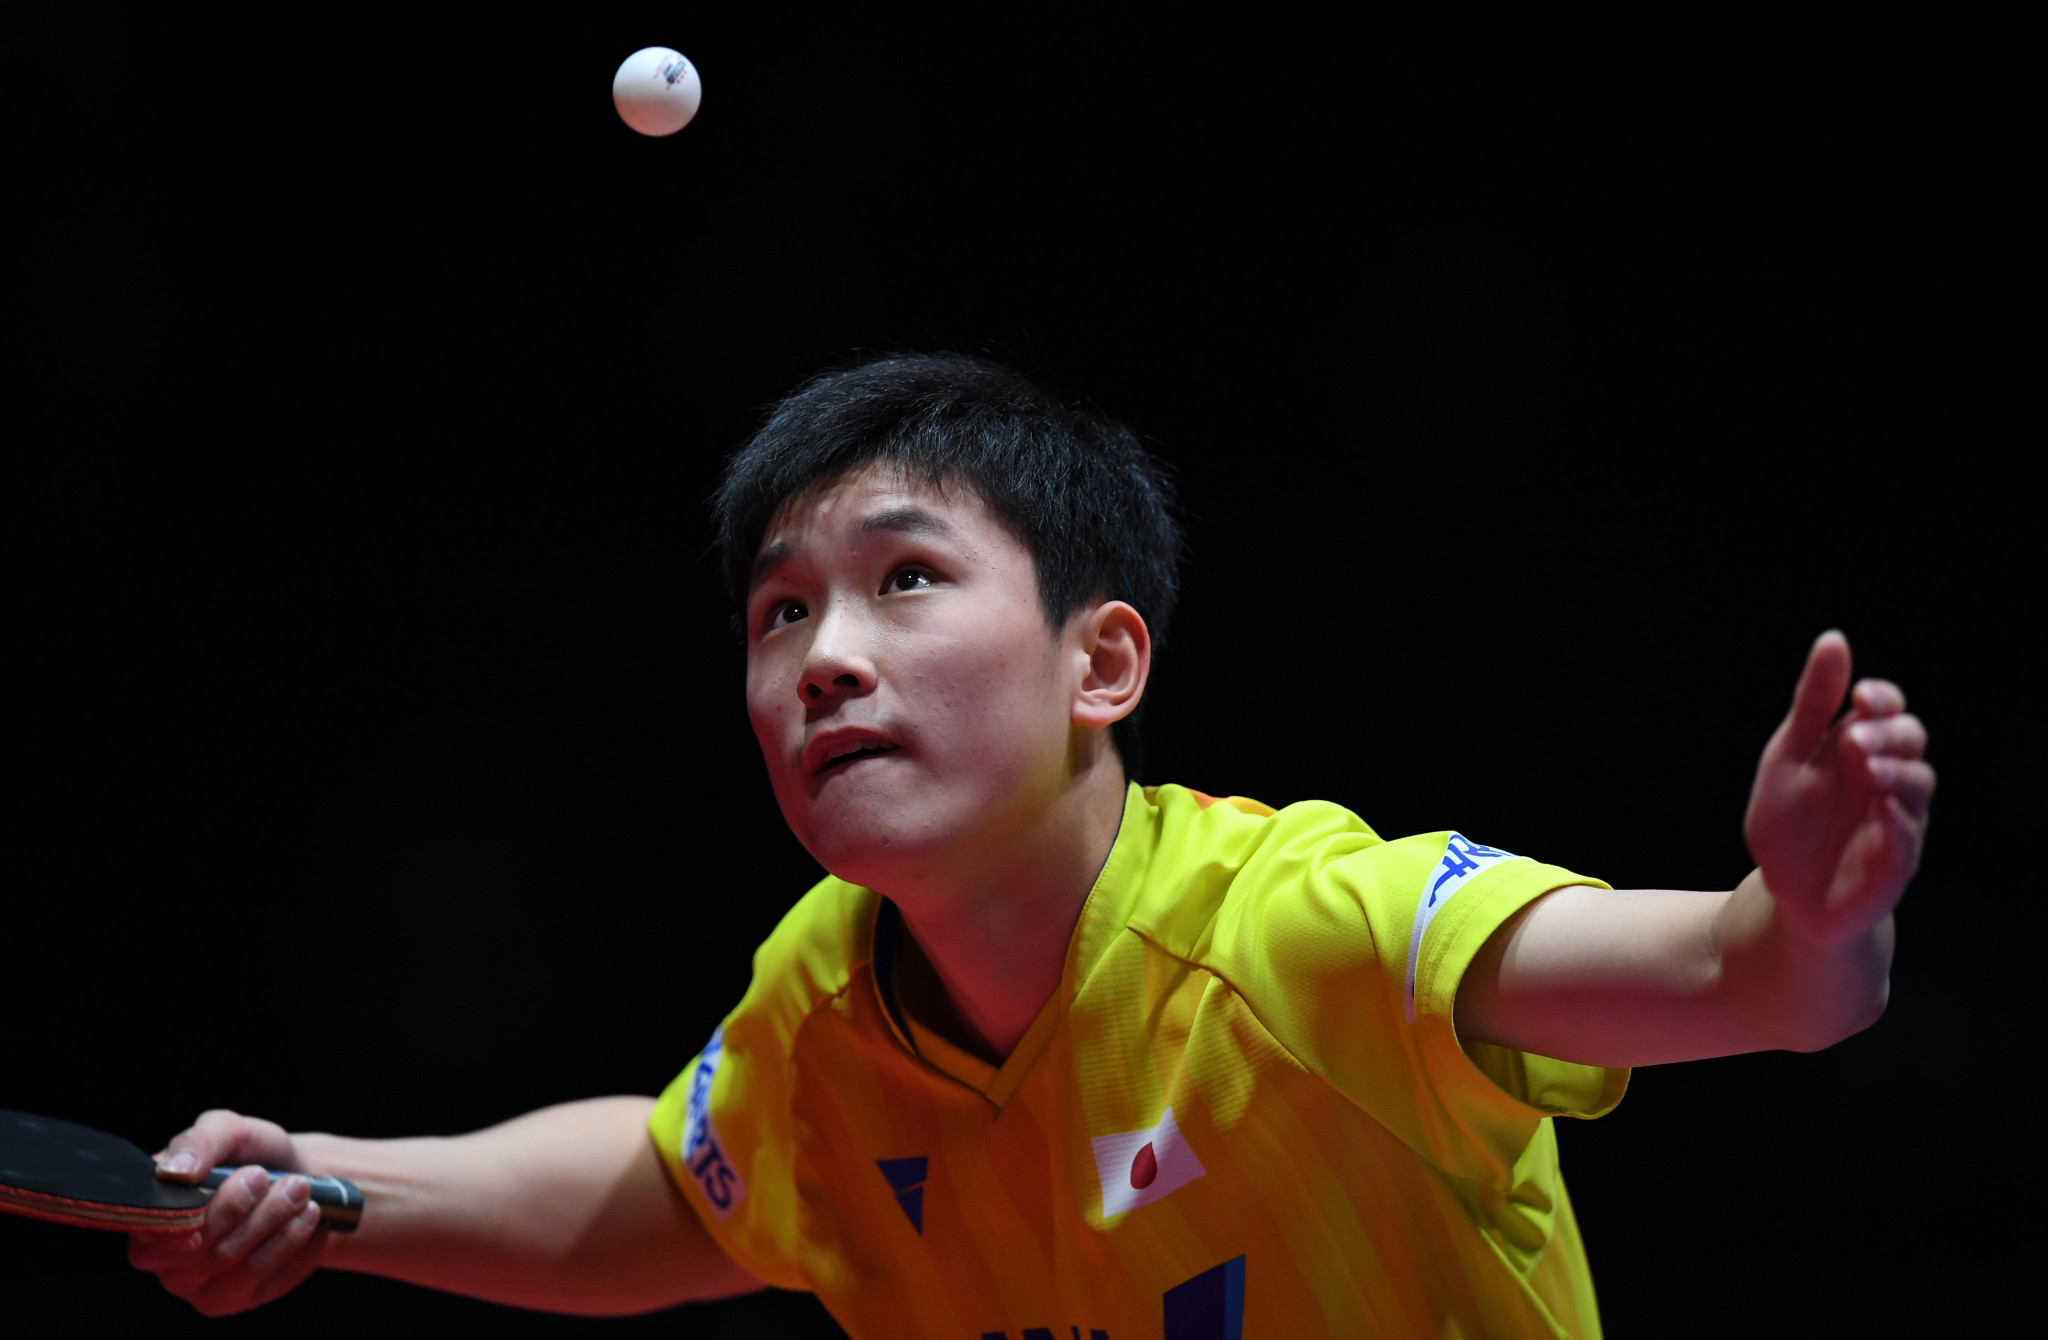 An ITTF YouTube video of Japanese teenager Tomokazu Harimoto beating Ma Long of China has accrued 11 years of viewing time ©Getty Images